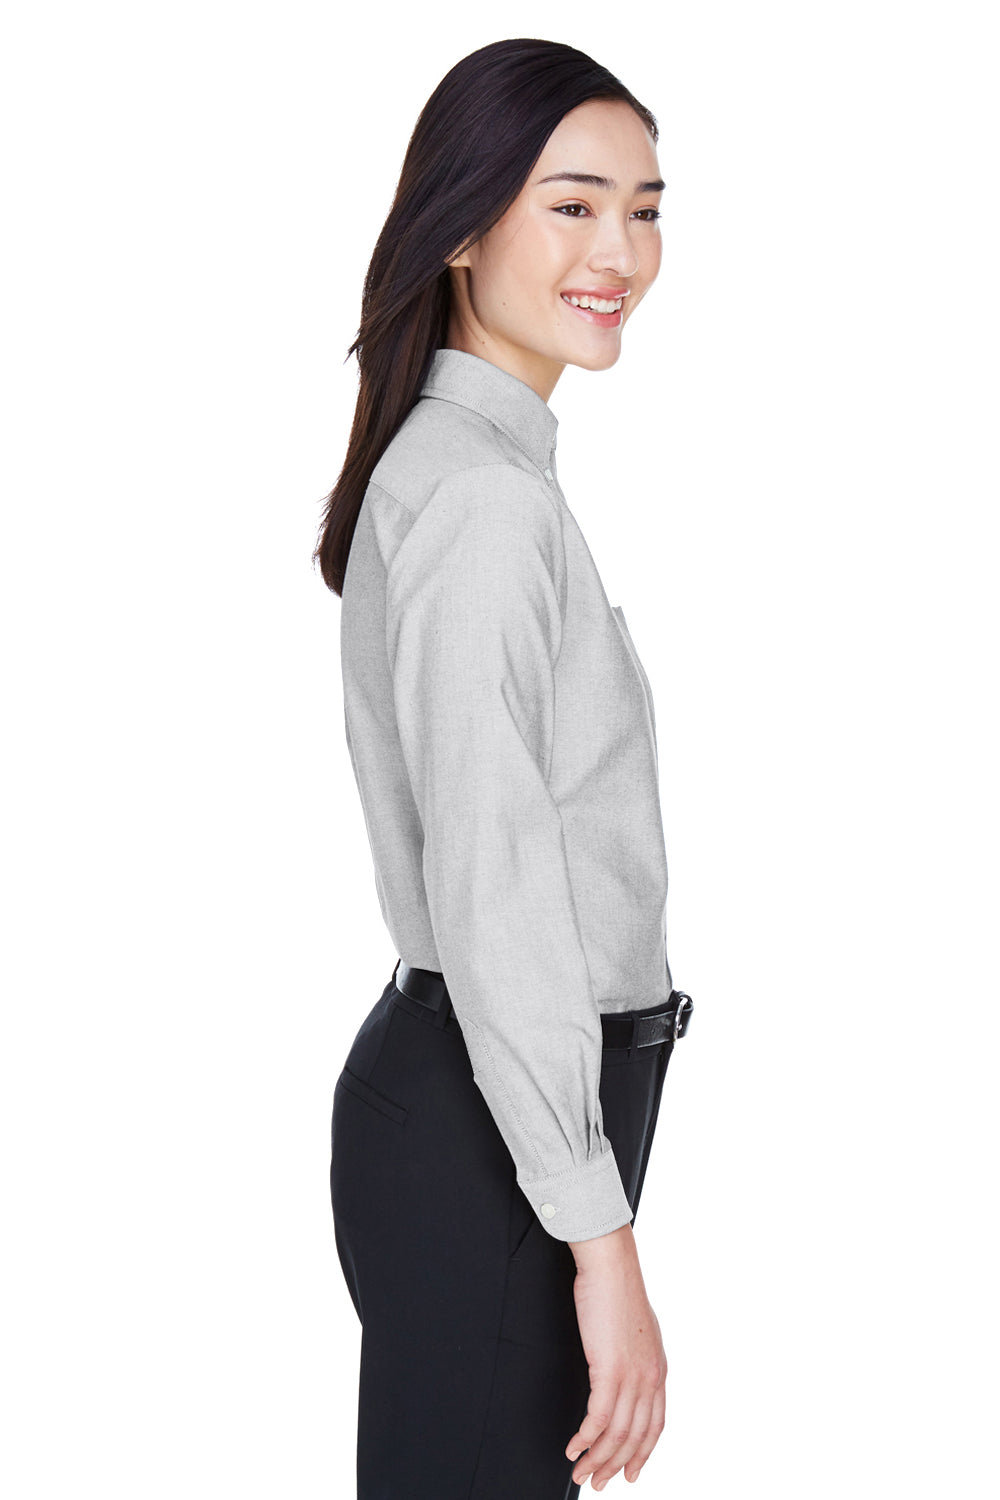 UltraClub 8990 Womens Classic Oxford Wrinkle Resistant Long Sleeve Button Down Shirt w/ Pocket Charcoal Grey Side